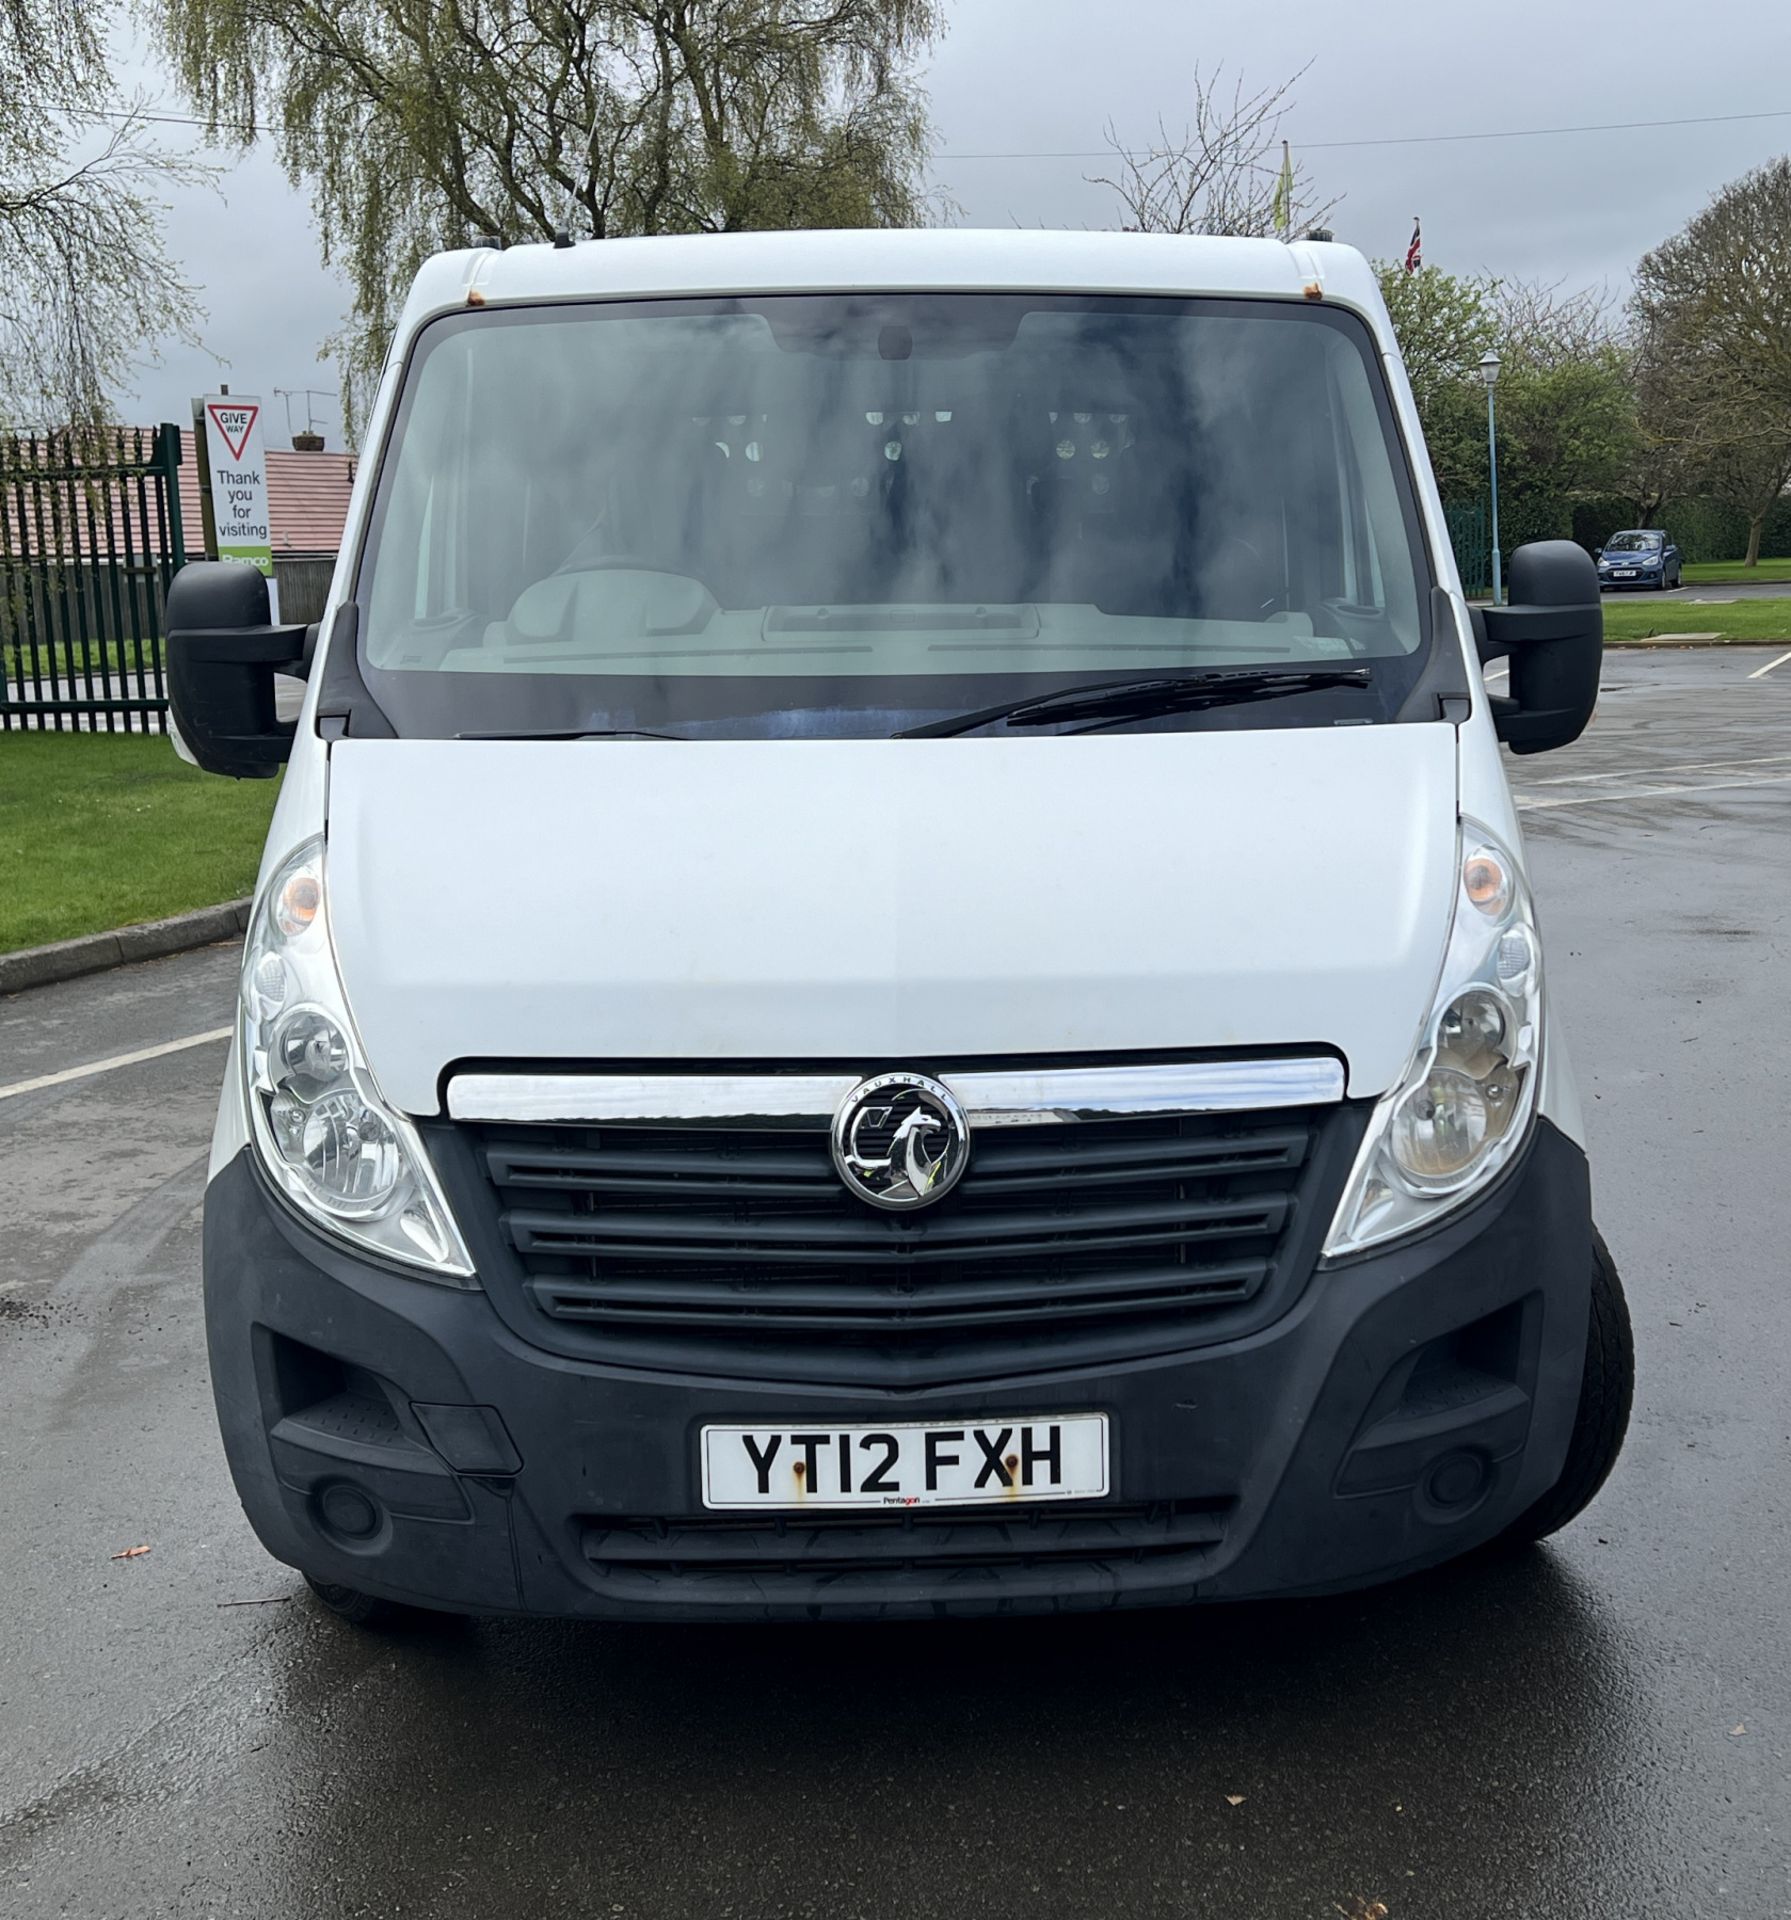 Vauxhall Movano white pickup truck - 2012 - Diesel - 38,049 miles - NO MOT (see description) - Image 3 of 20